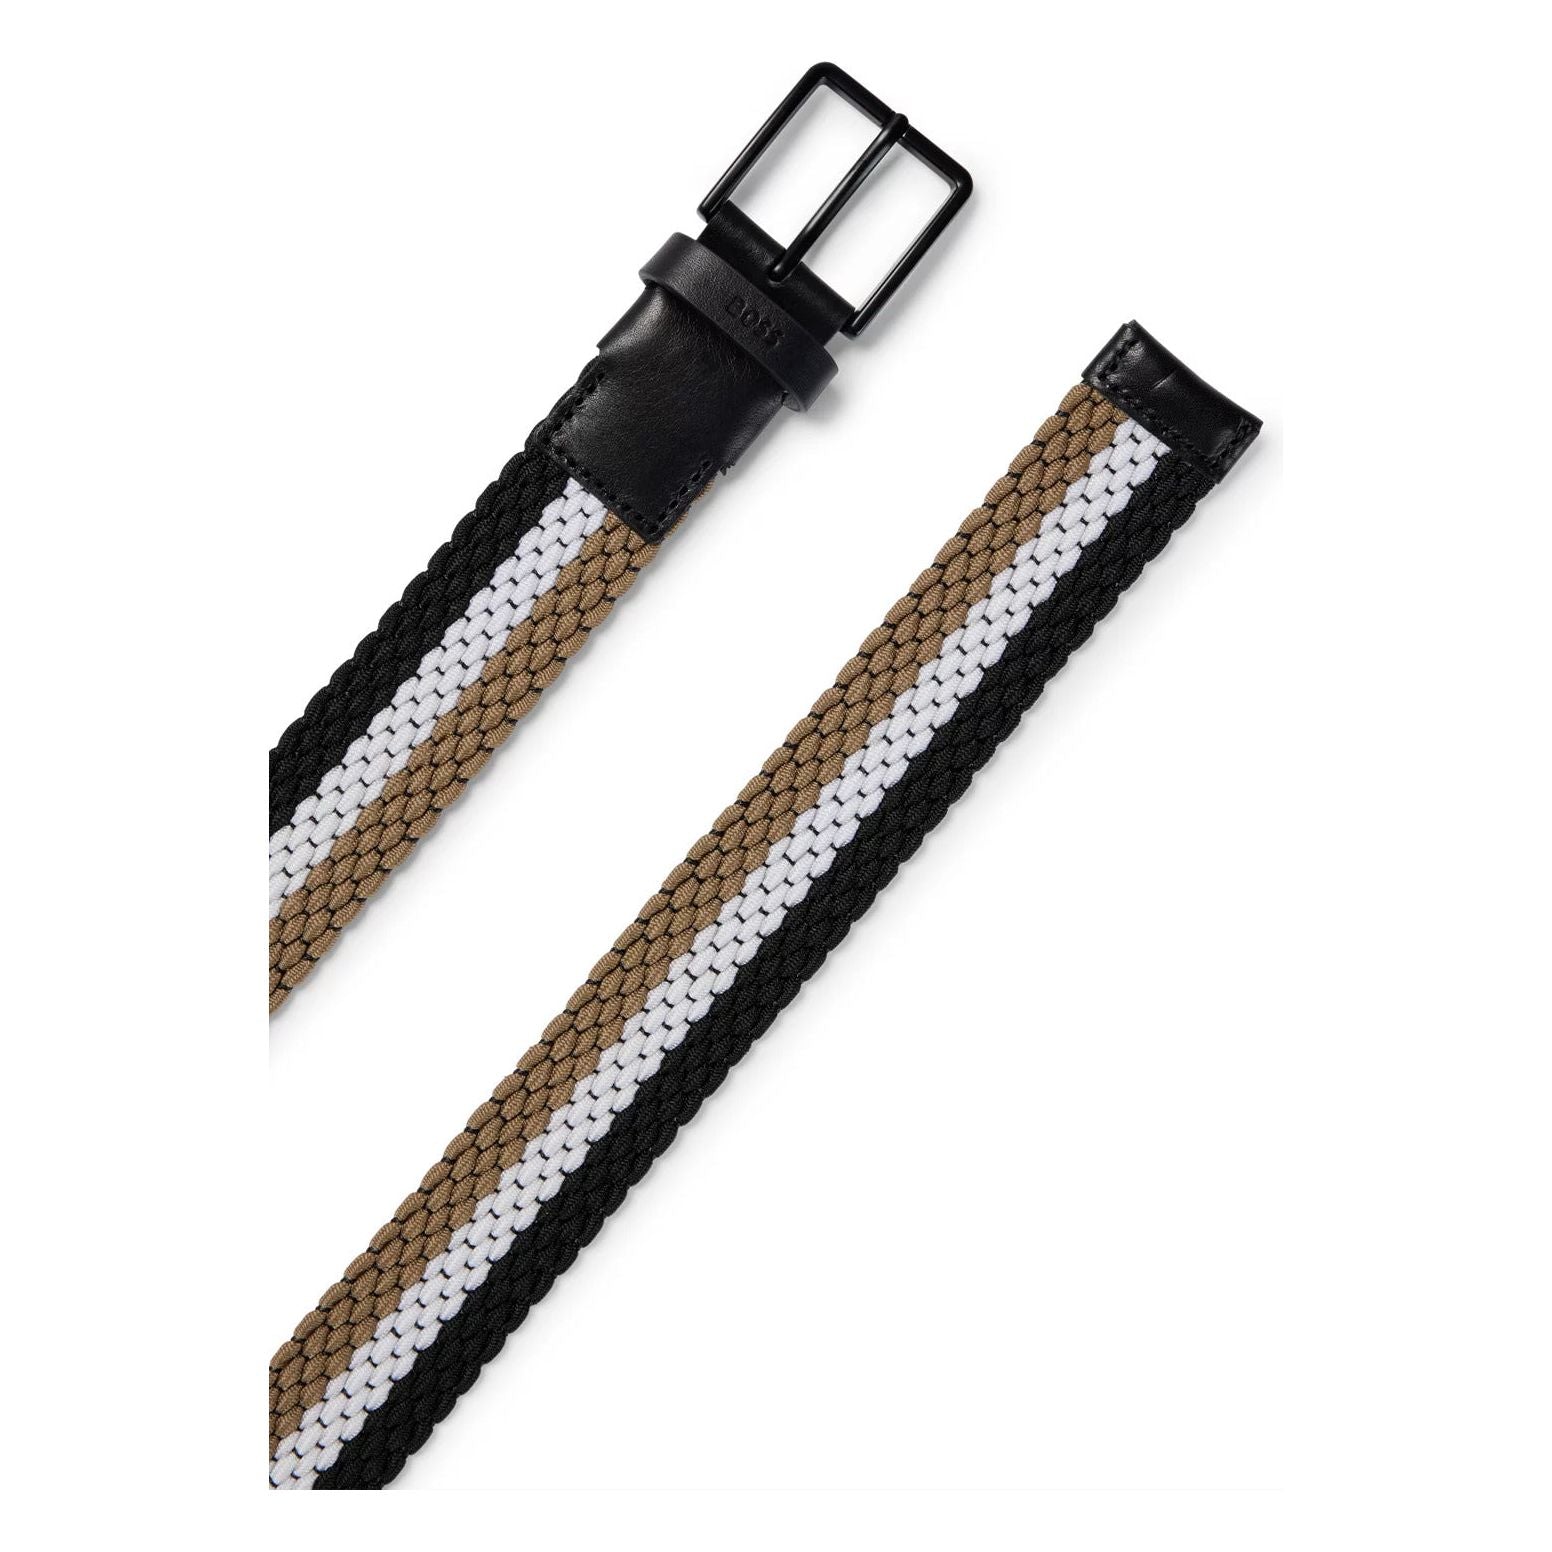 BOSS WOVEN BELT WITH LEATHER TRIM AND CONTRASTING COLOR DETAILS - Yooto